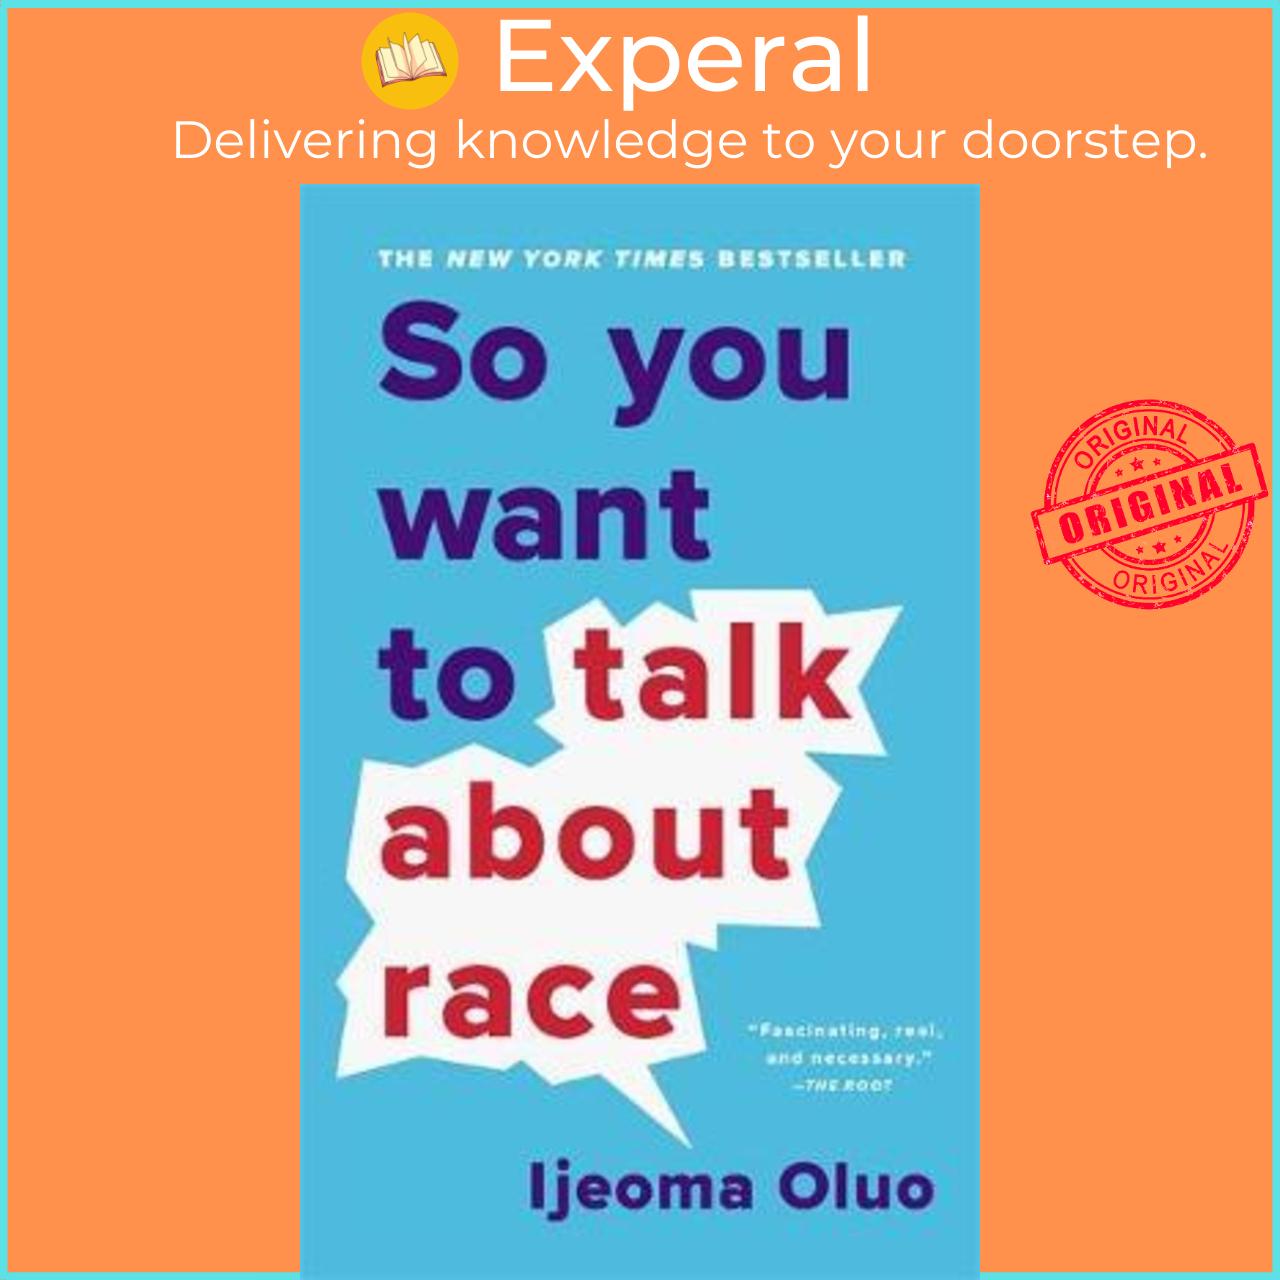 Sách - So You Want to Talk About Race by Ijeoma Oluo (US edition, paperback)